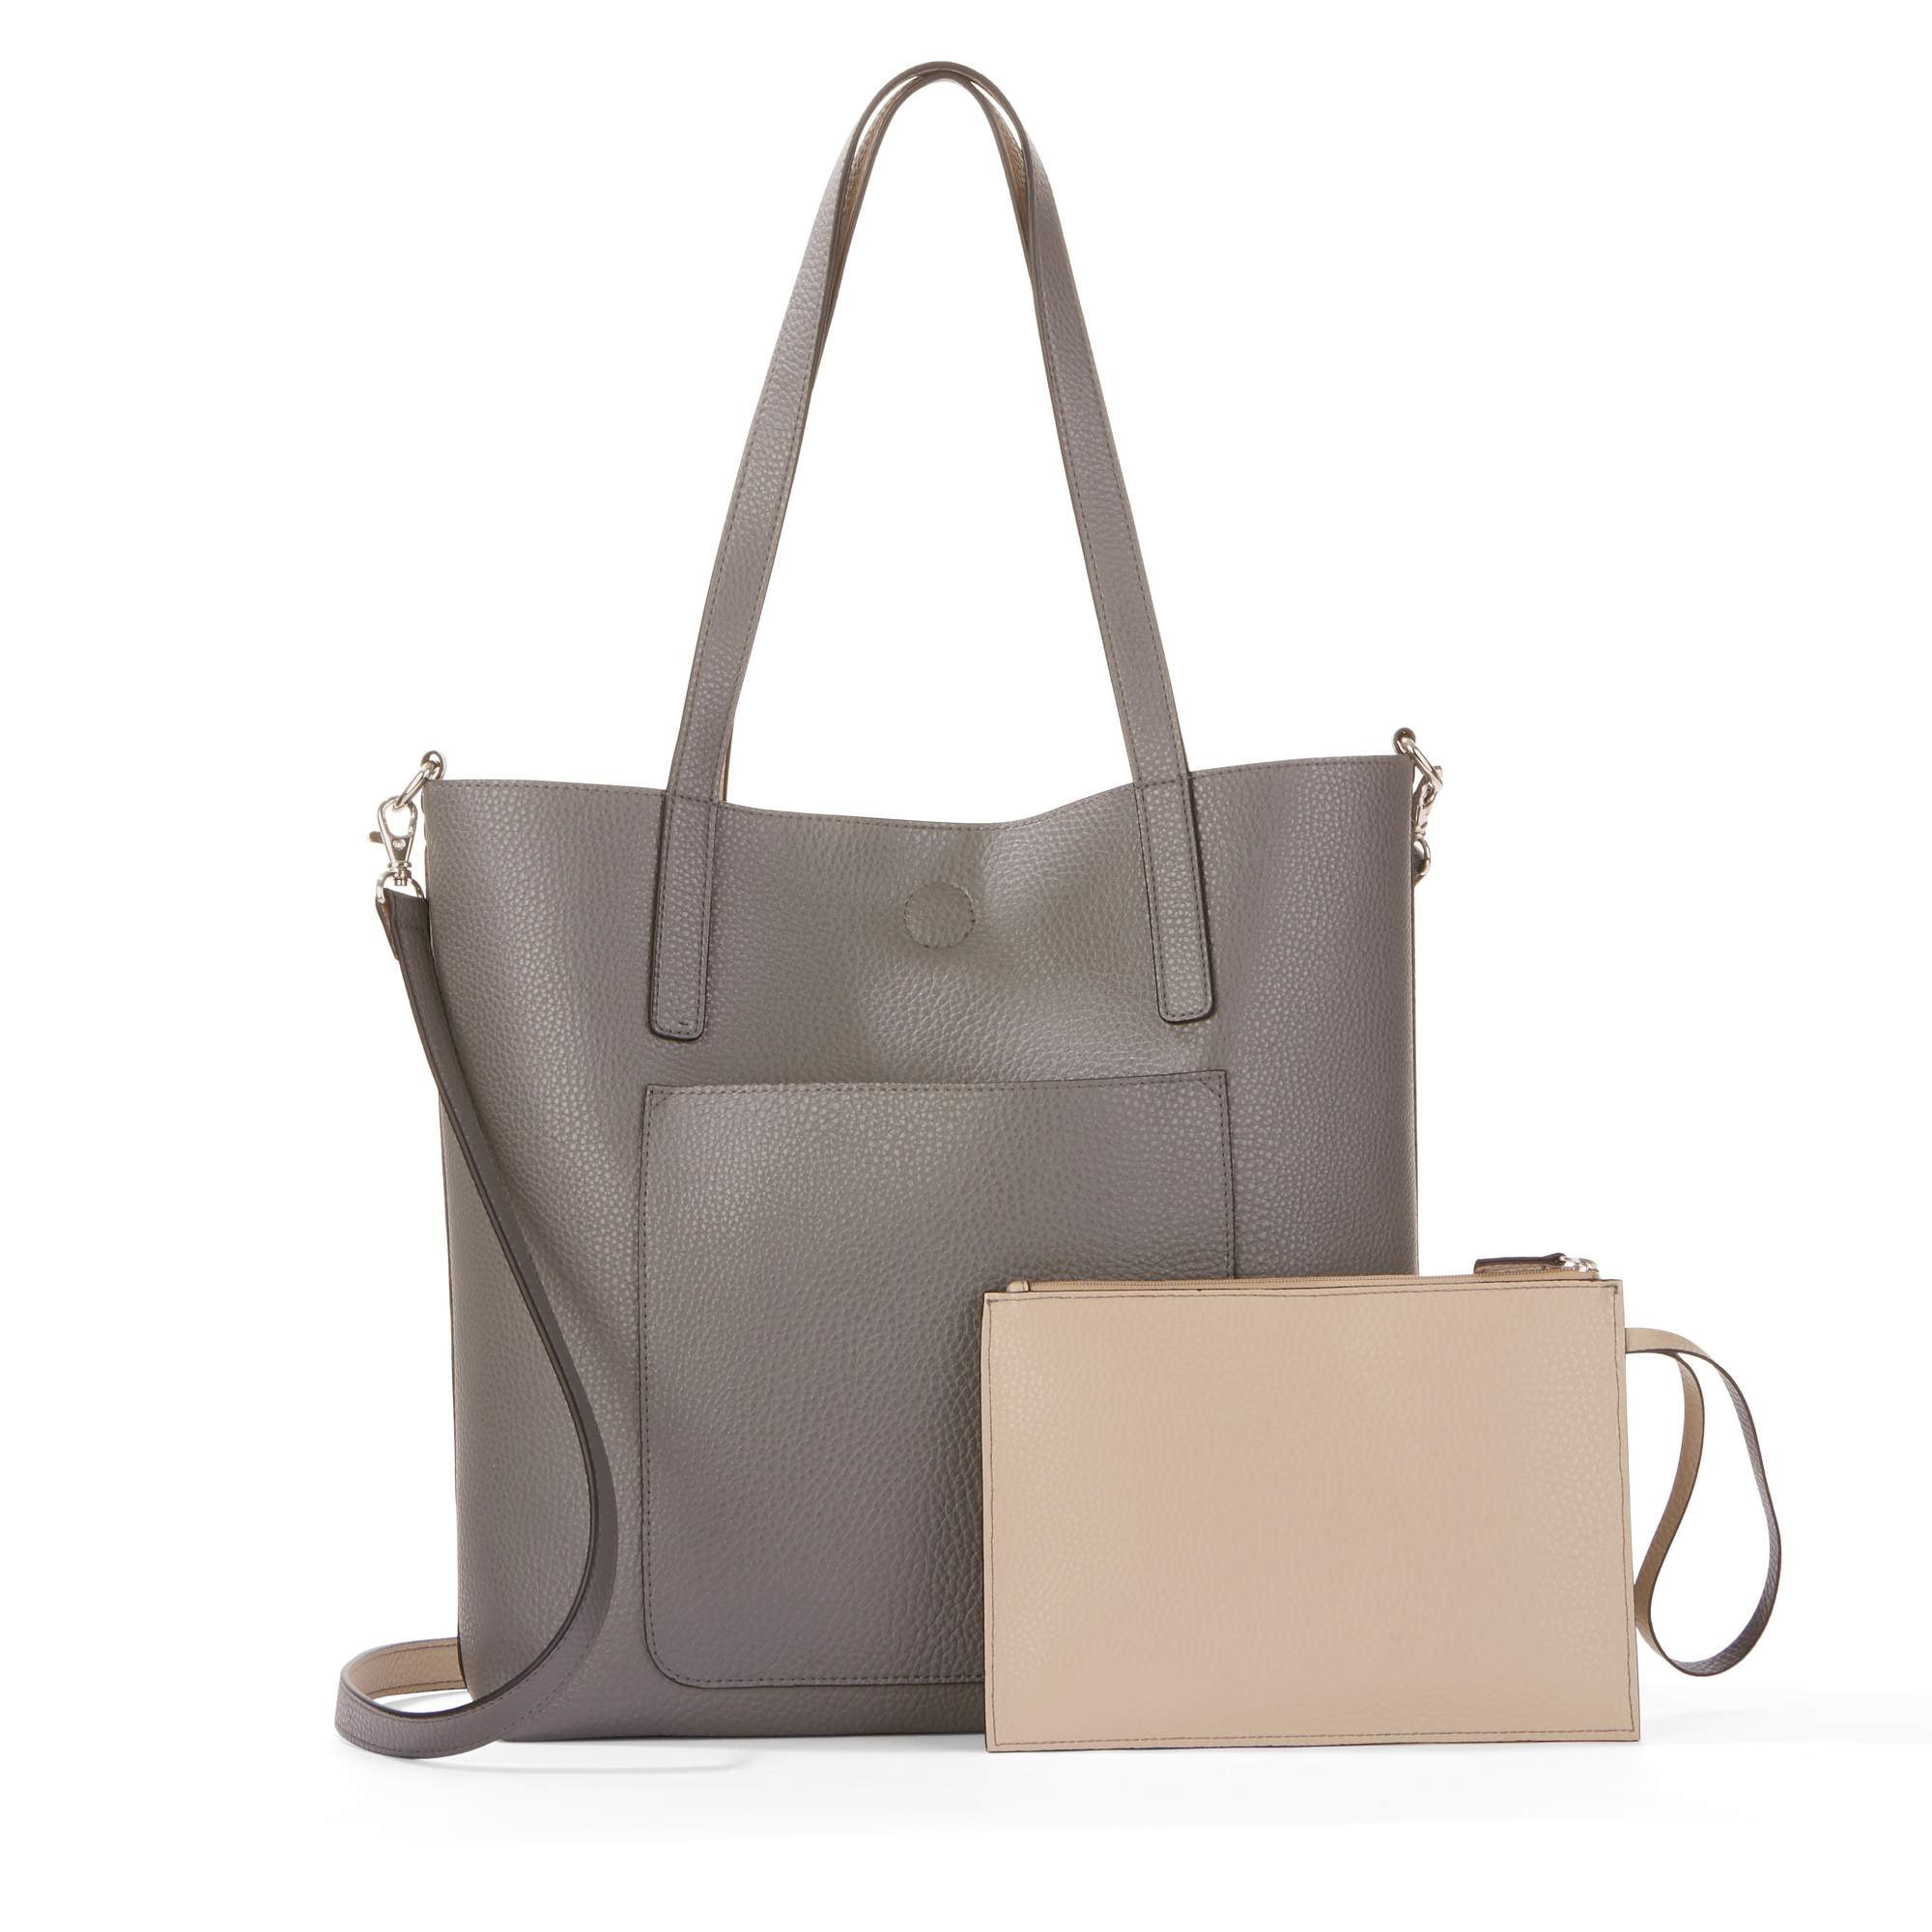 Take Me Anywhere Reversible Tote - Dark Taupe/Beige – The Pulse